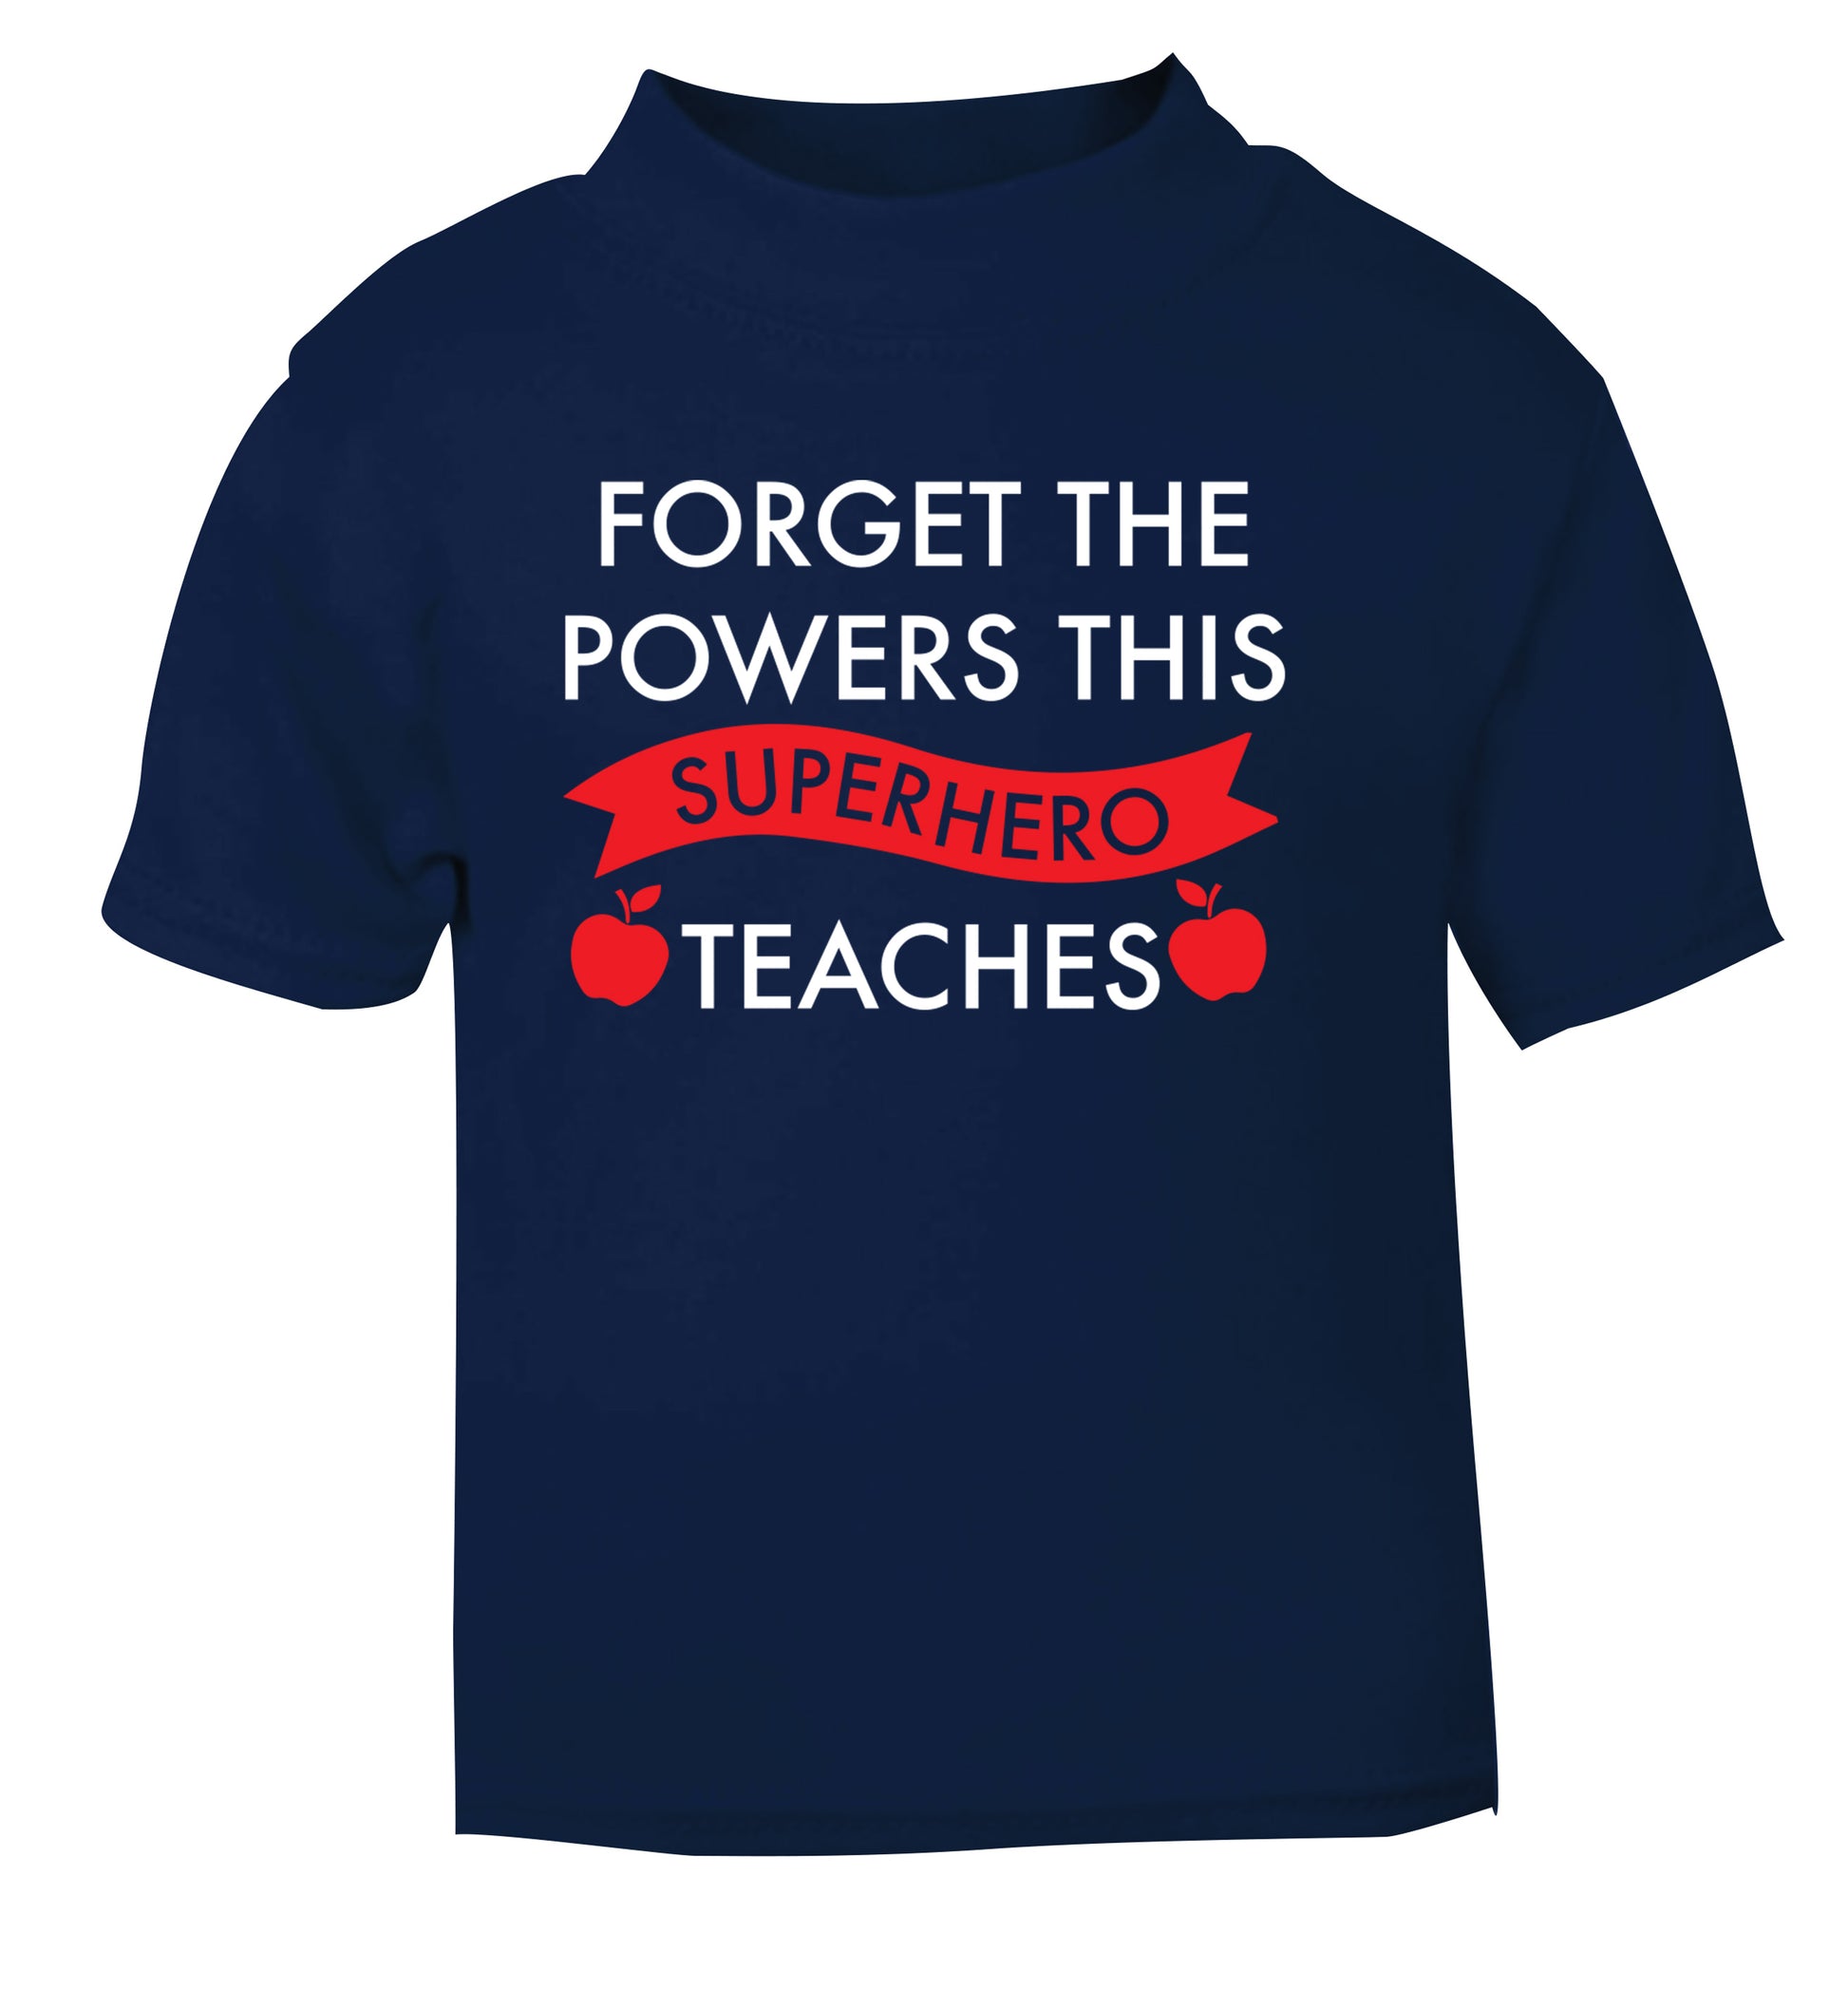 Forget the powers this superhero teaches navy Baby Toddler Tshirt 2 Years